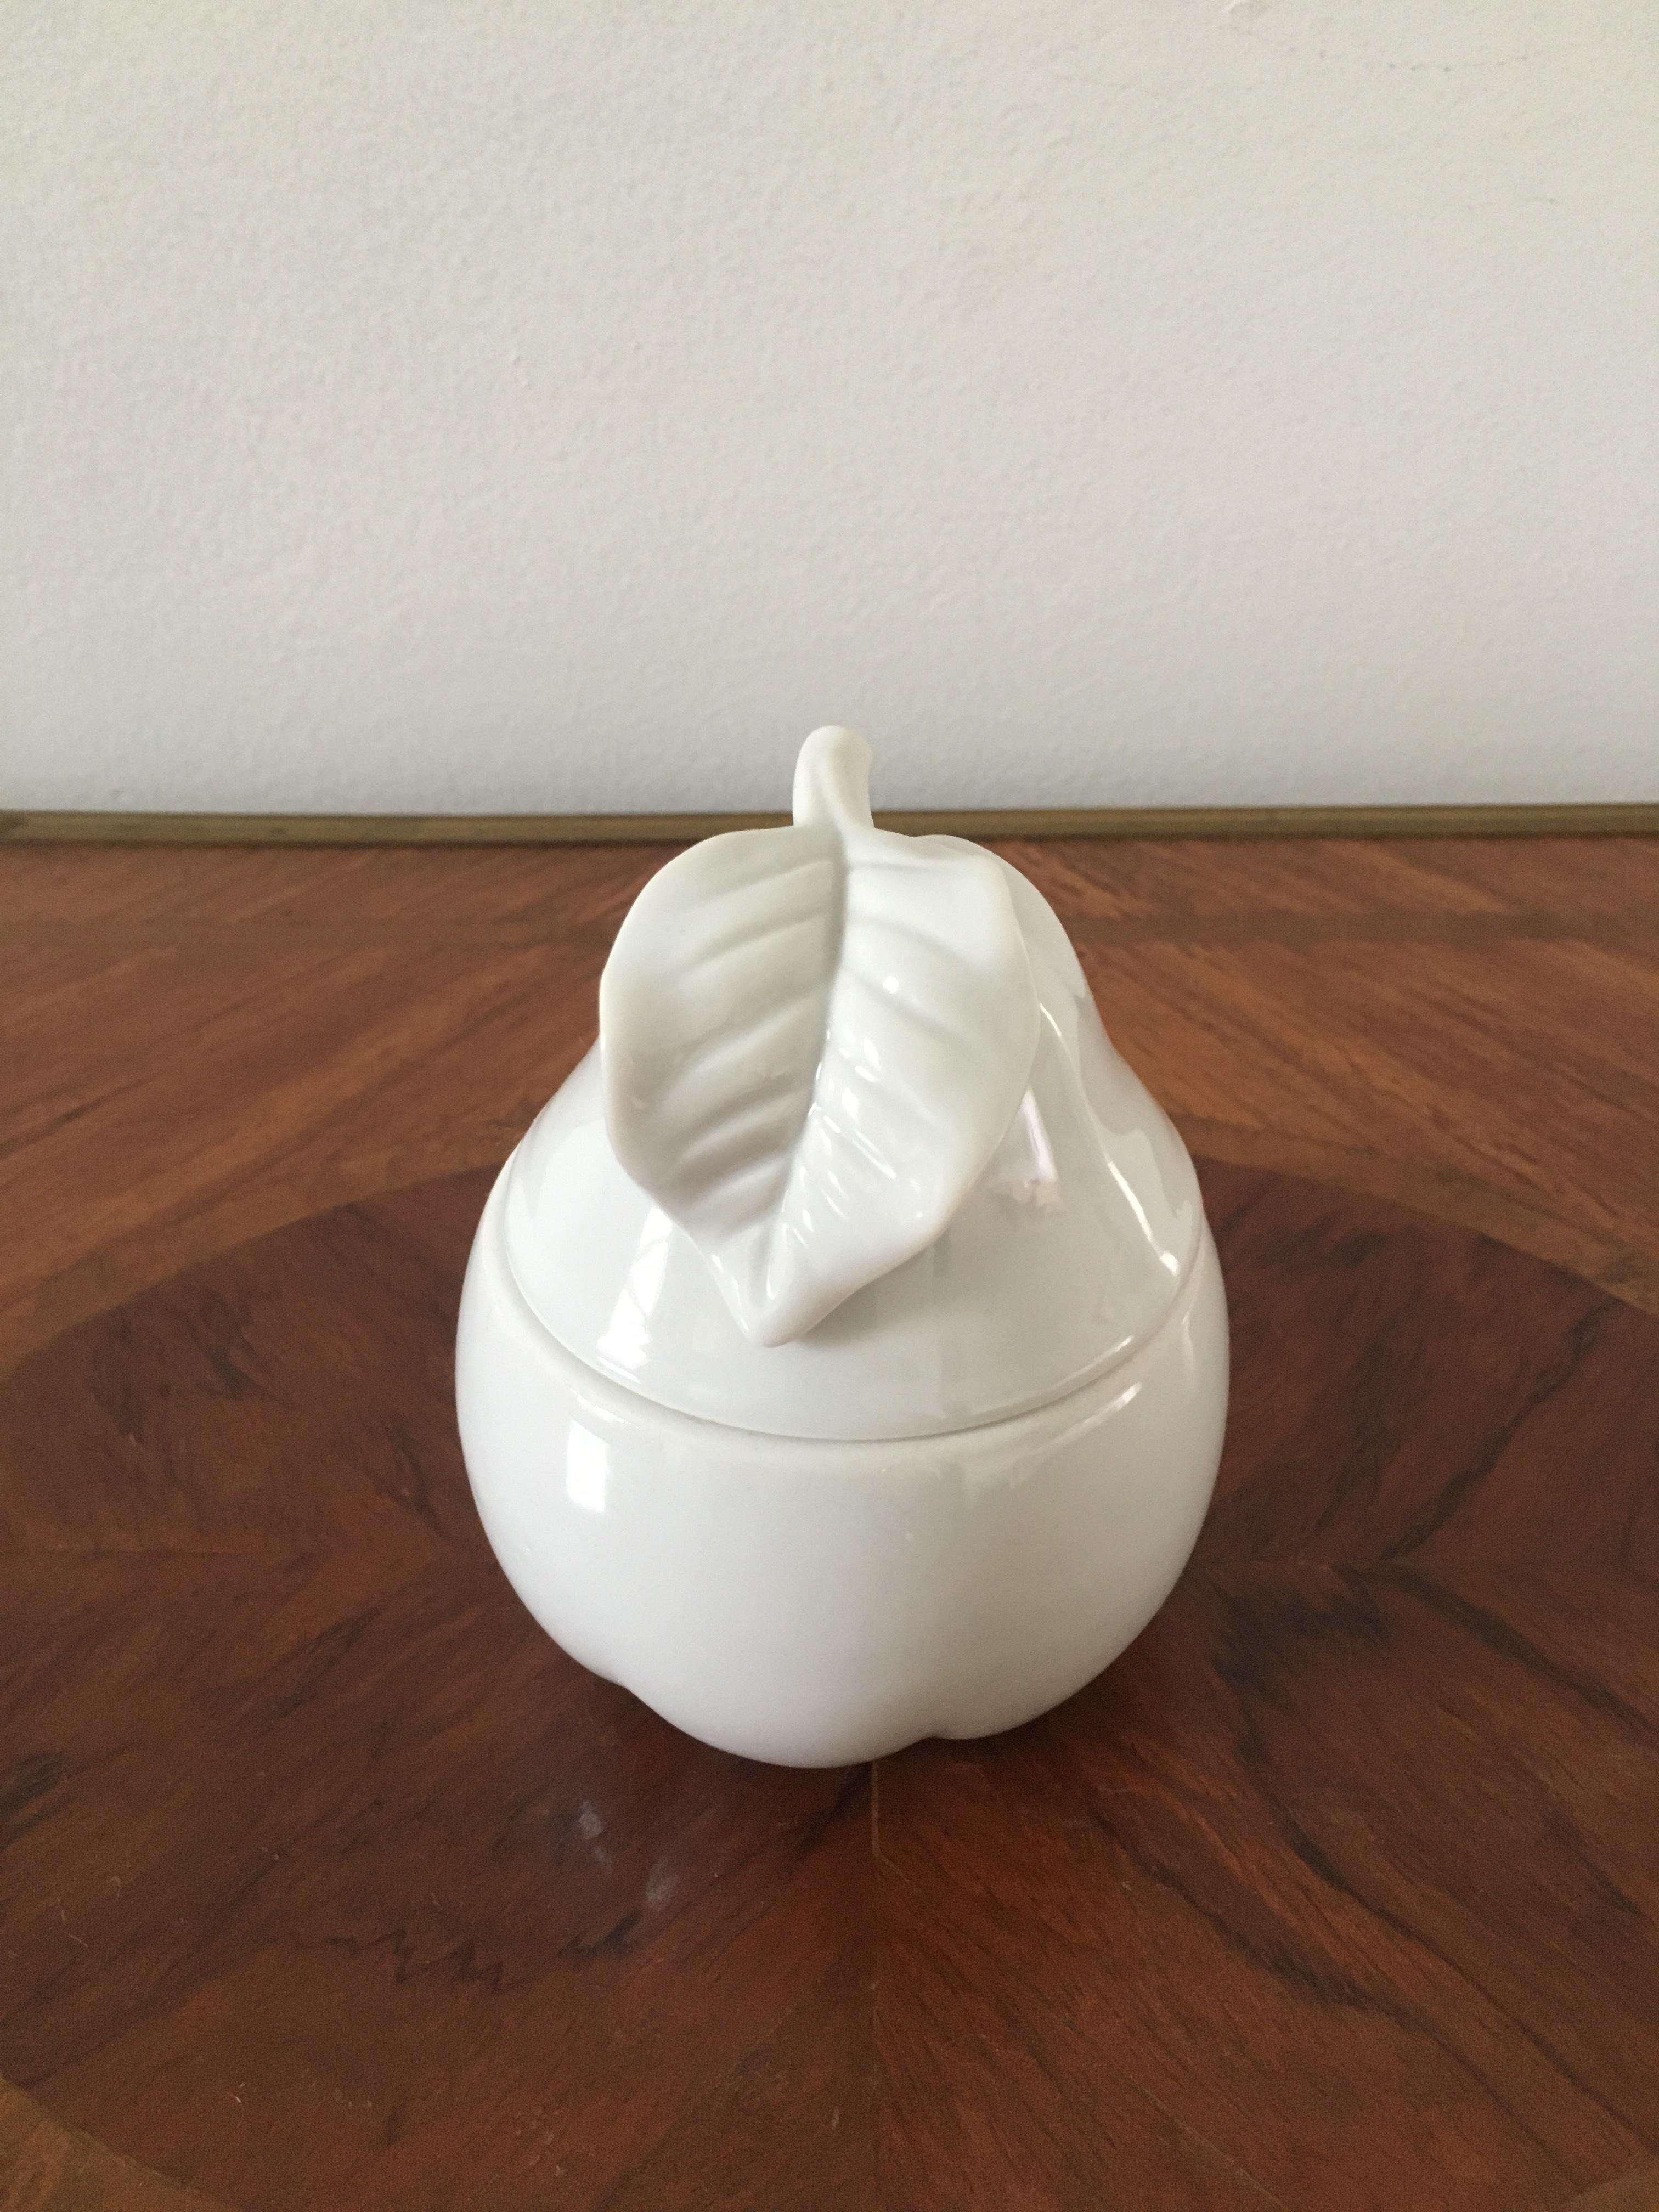 A charming French Country style vintage ceramic pear lidded container.

USA, Late 20th Century

Measures: 3.5ʺW × 3.5ʺD × 4.75ʺH

Very good vintage condition.
